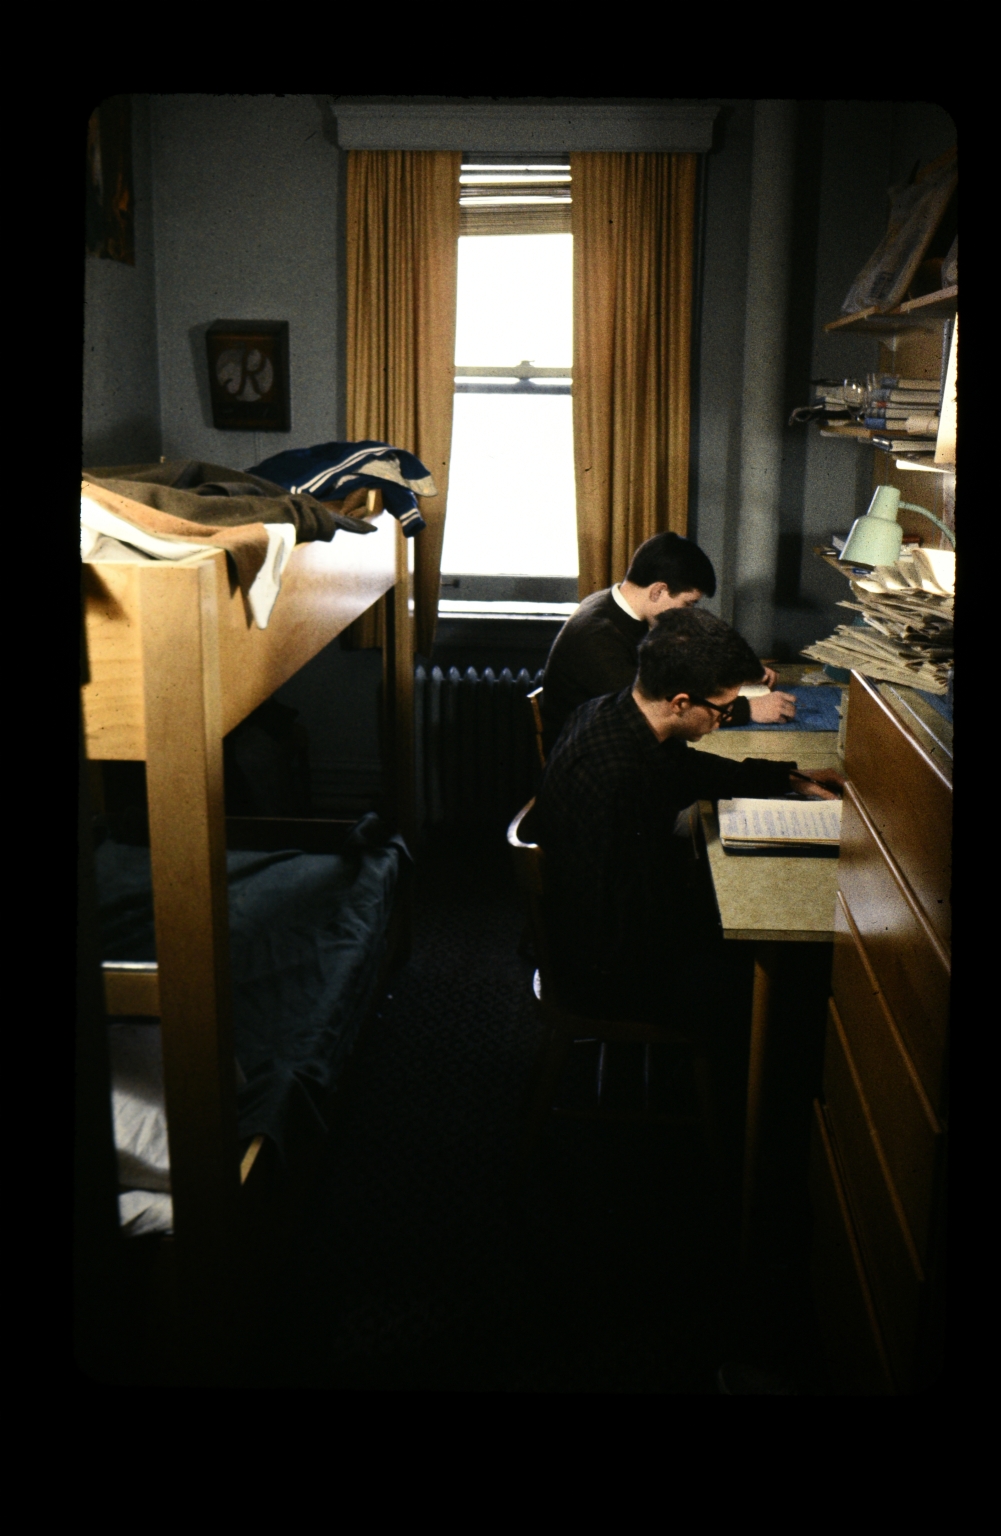 Interior of a college dorm room with students